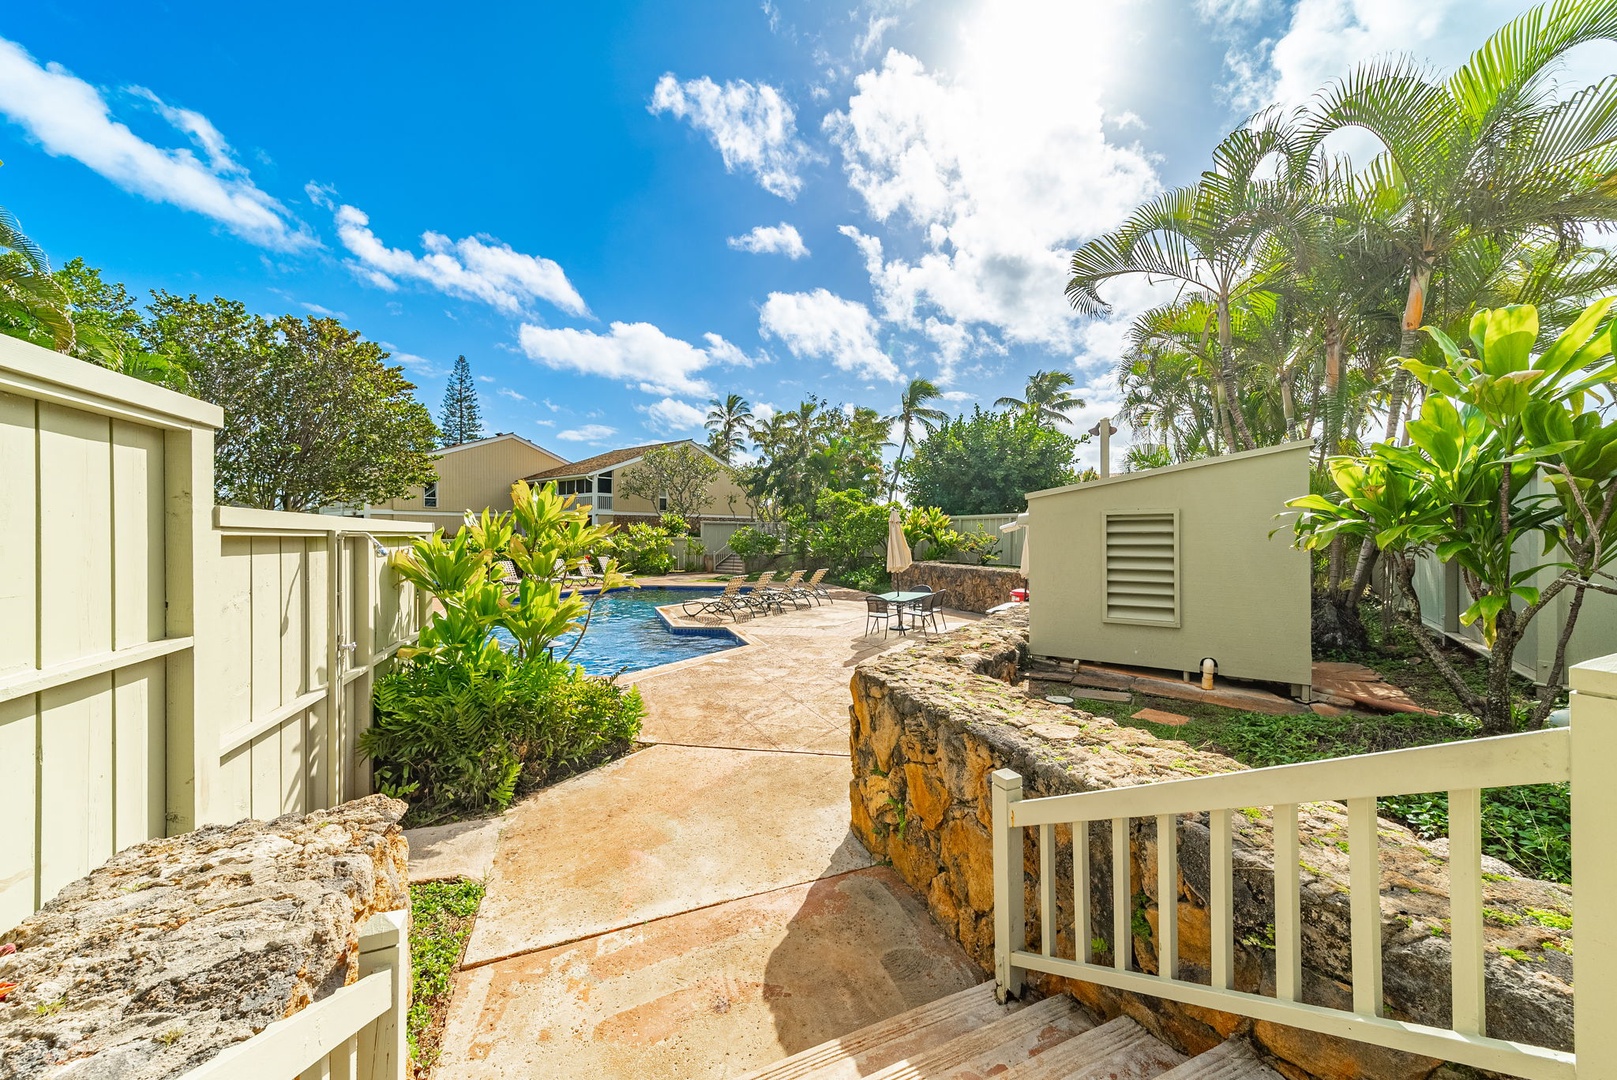 Kahuku Vacation Rentals, Kuilima Estates East #164 - As a Kuilima Estates guest, you'll have exclusive access to the resort's amenities. Enjoy community pools, shared BBQ grills, and tennis courts as part of your vacation experience!